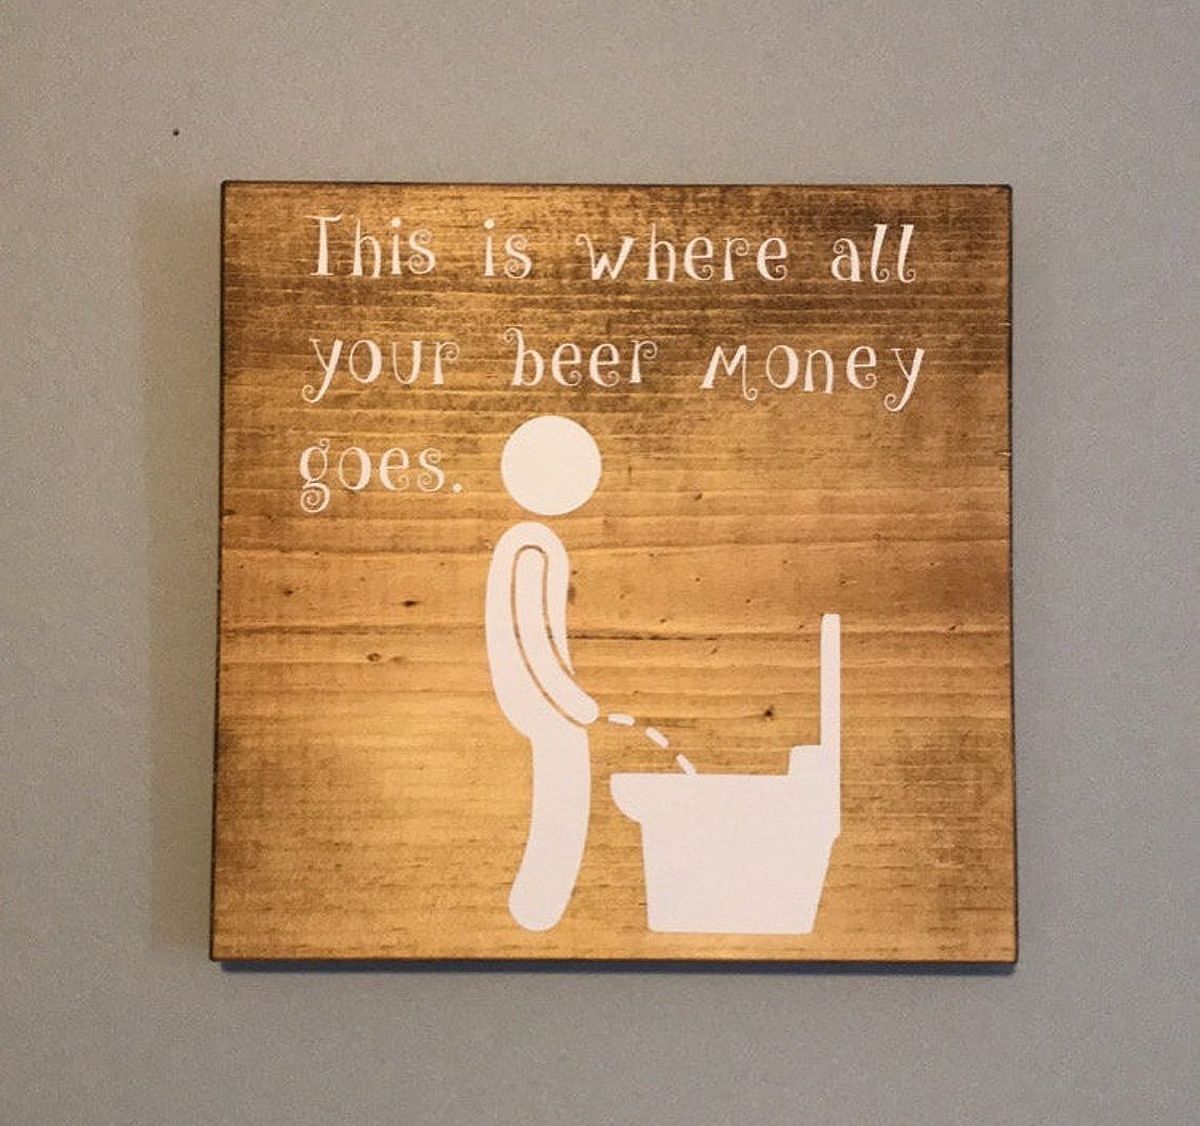 Gain-a-bit-of-unconventional-wisdom-with-the-bathroom-sign-57627